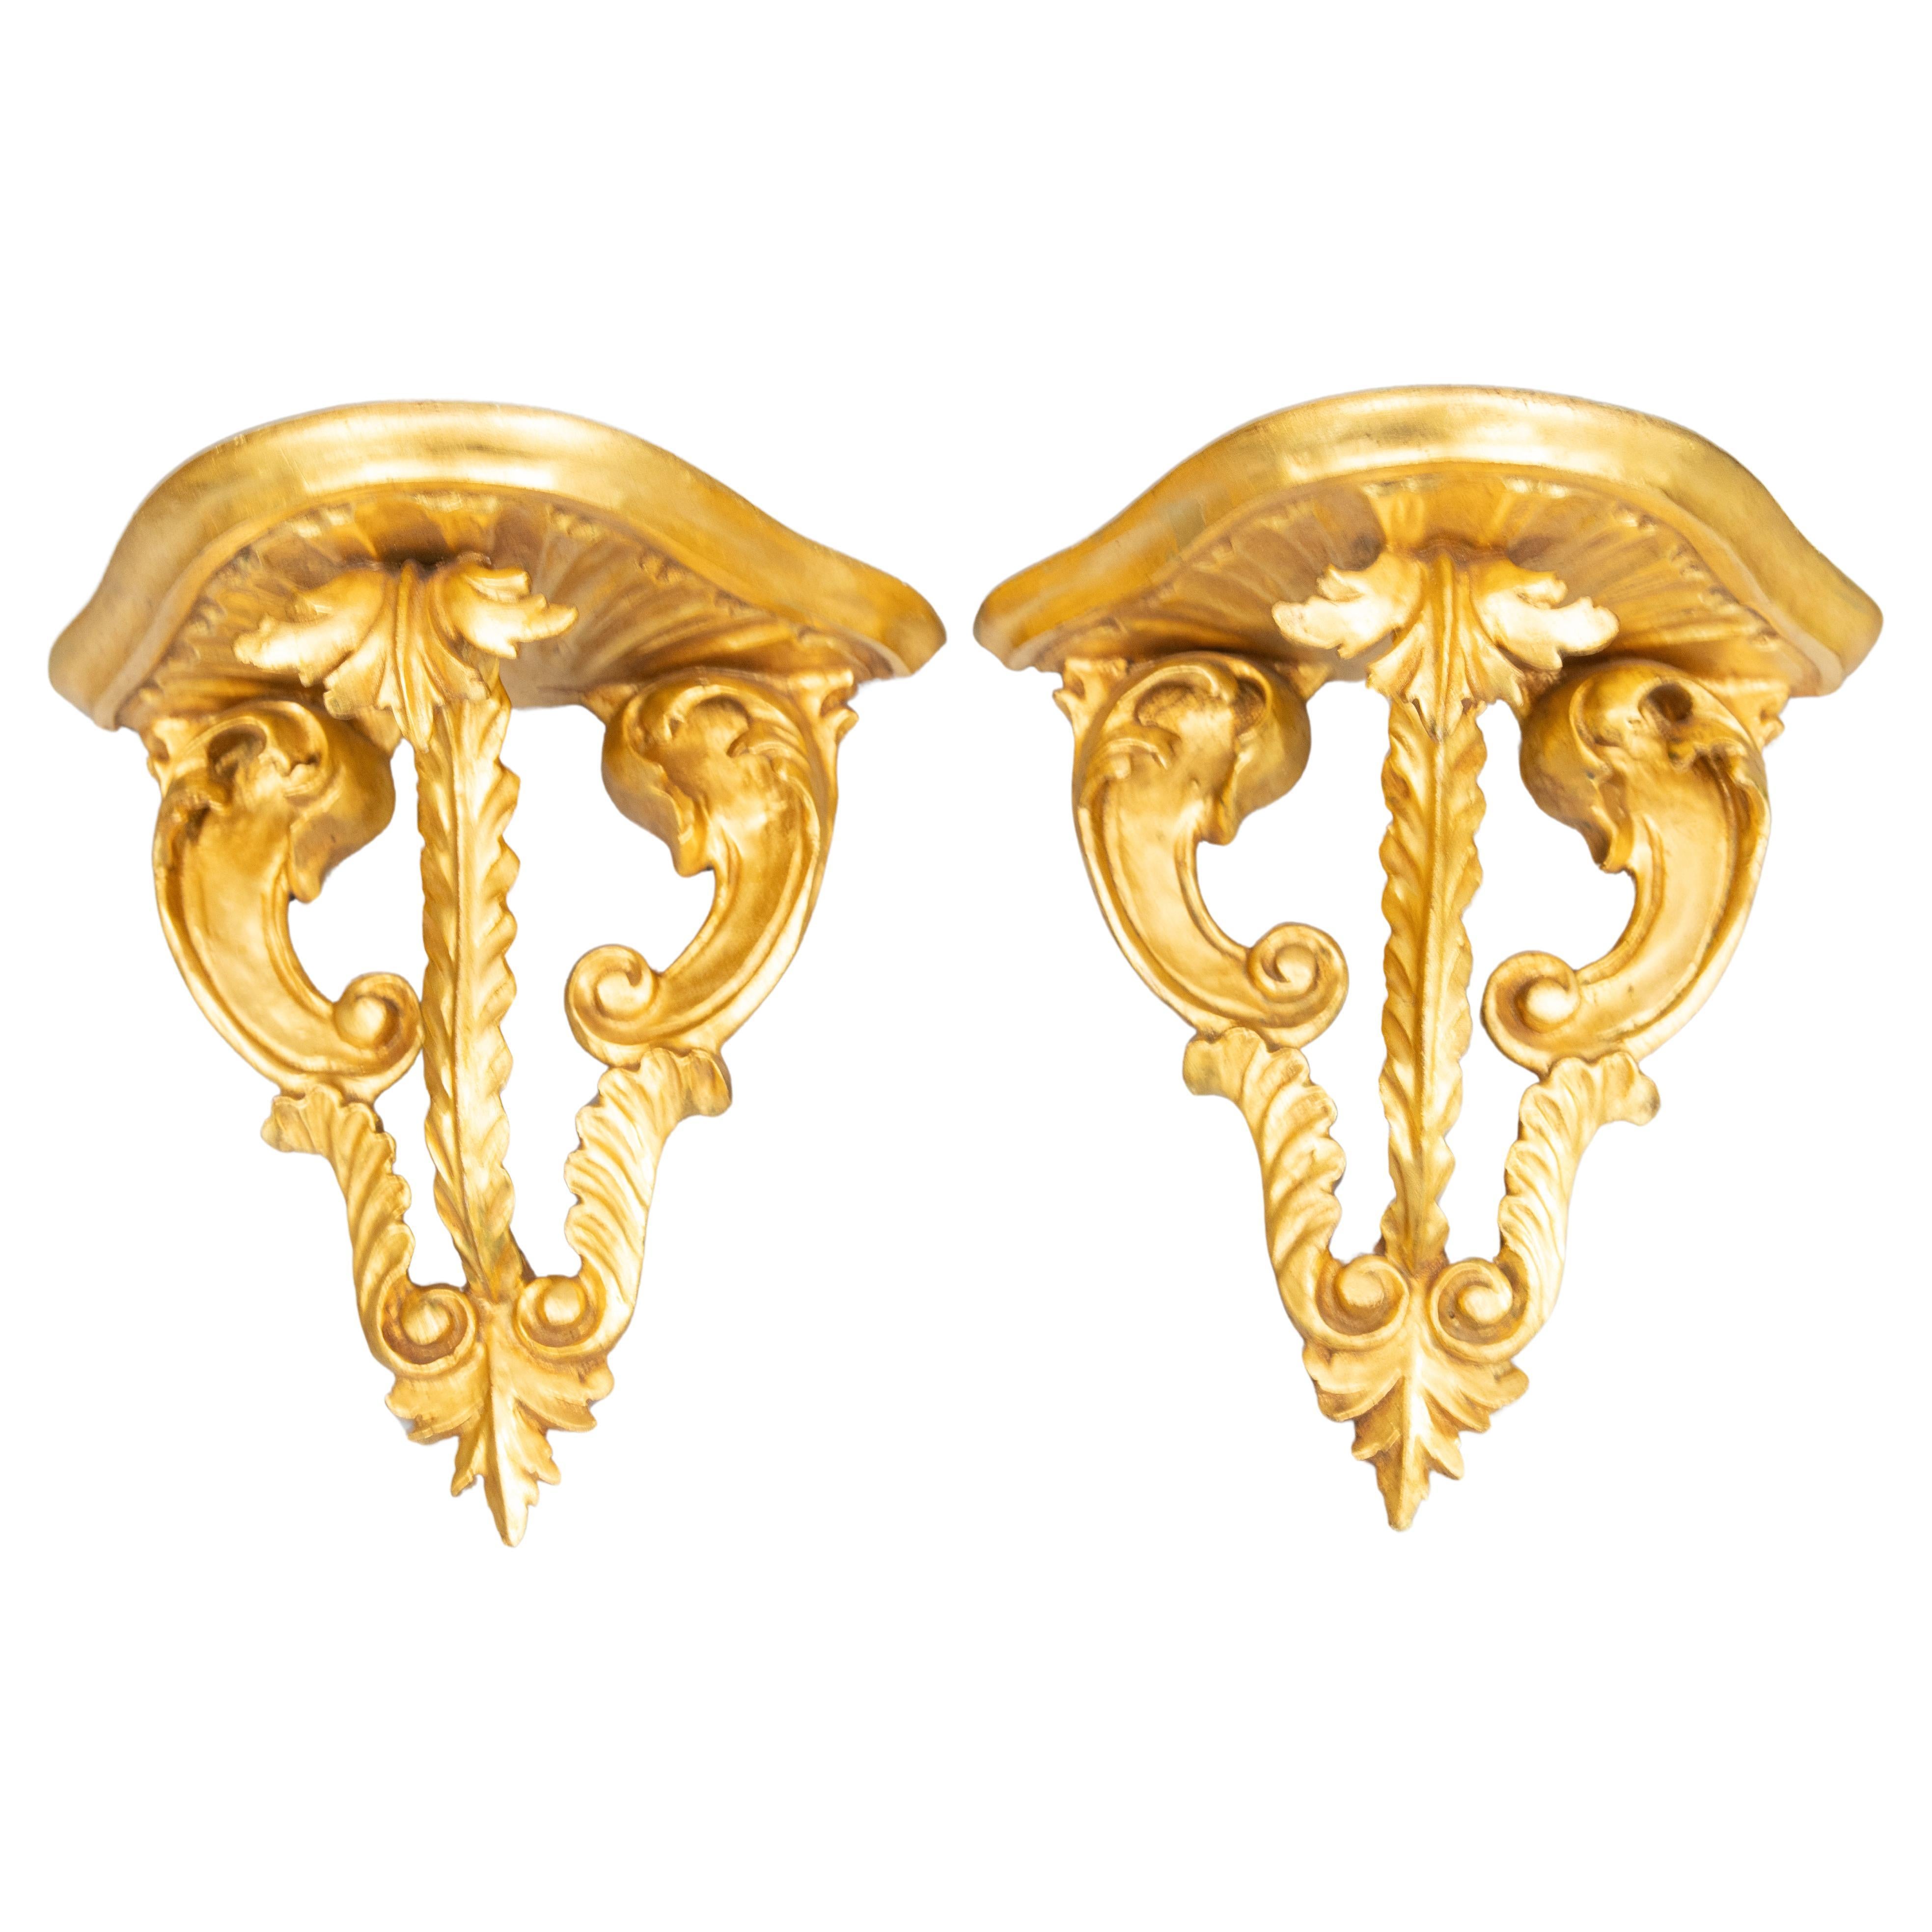 Pair of Italian Florentine Carved Giltwood Wall Brackets Shelves, circa 1950 For Sale